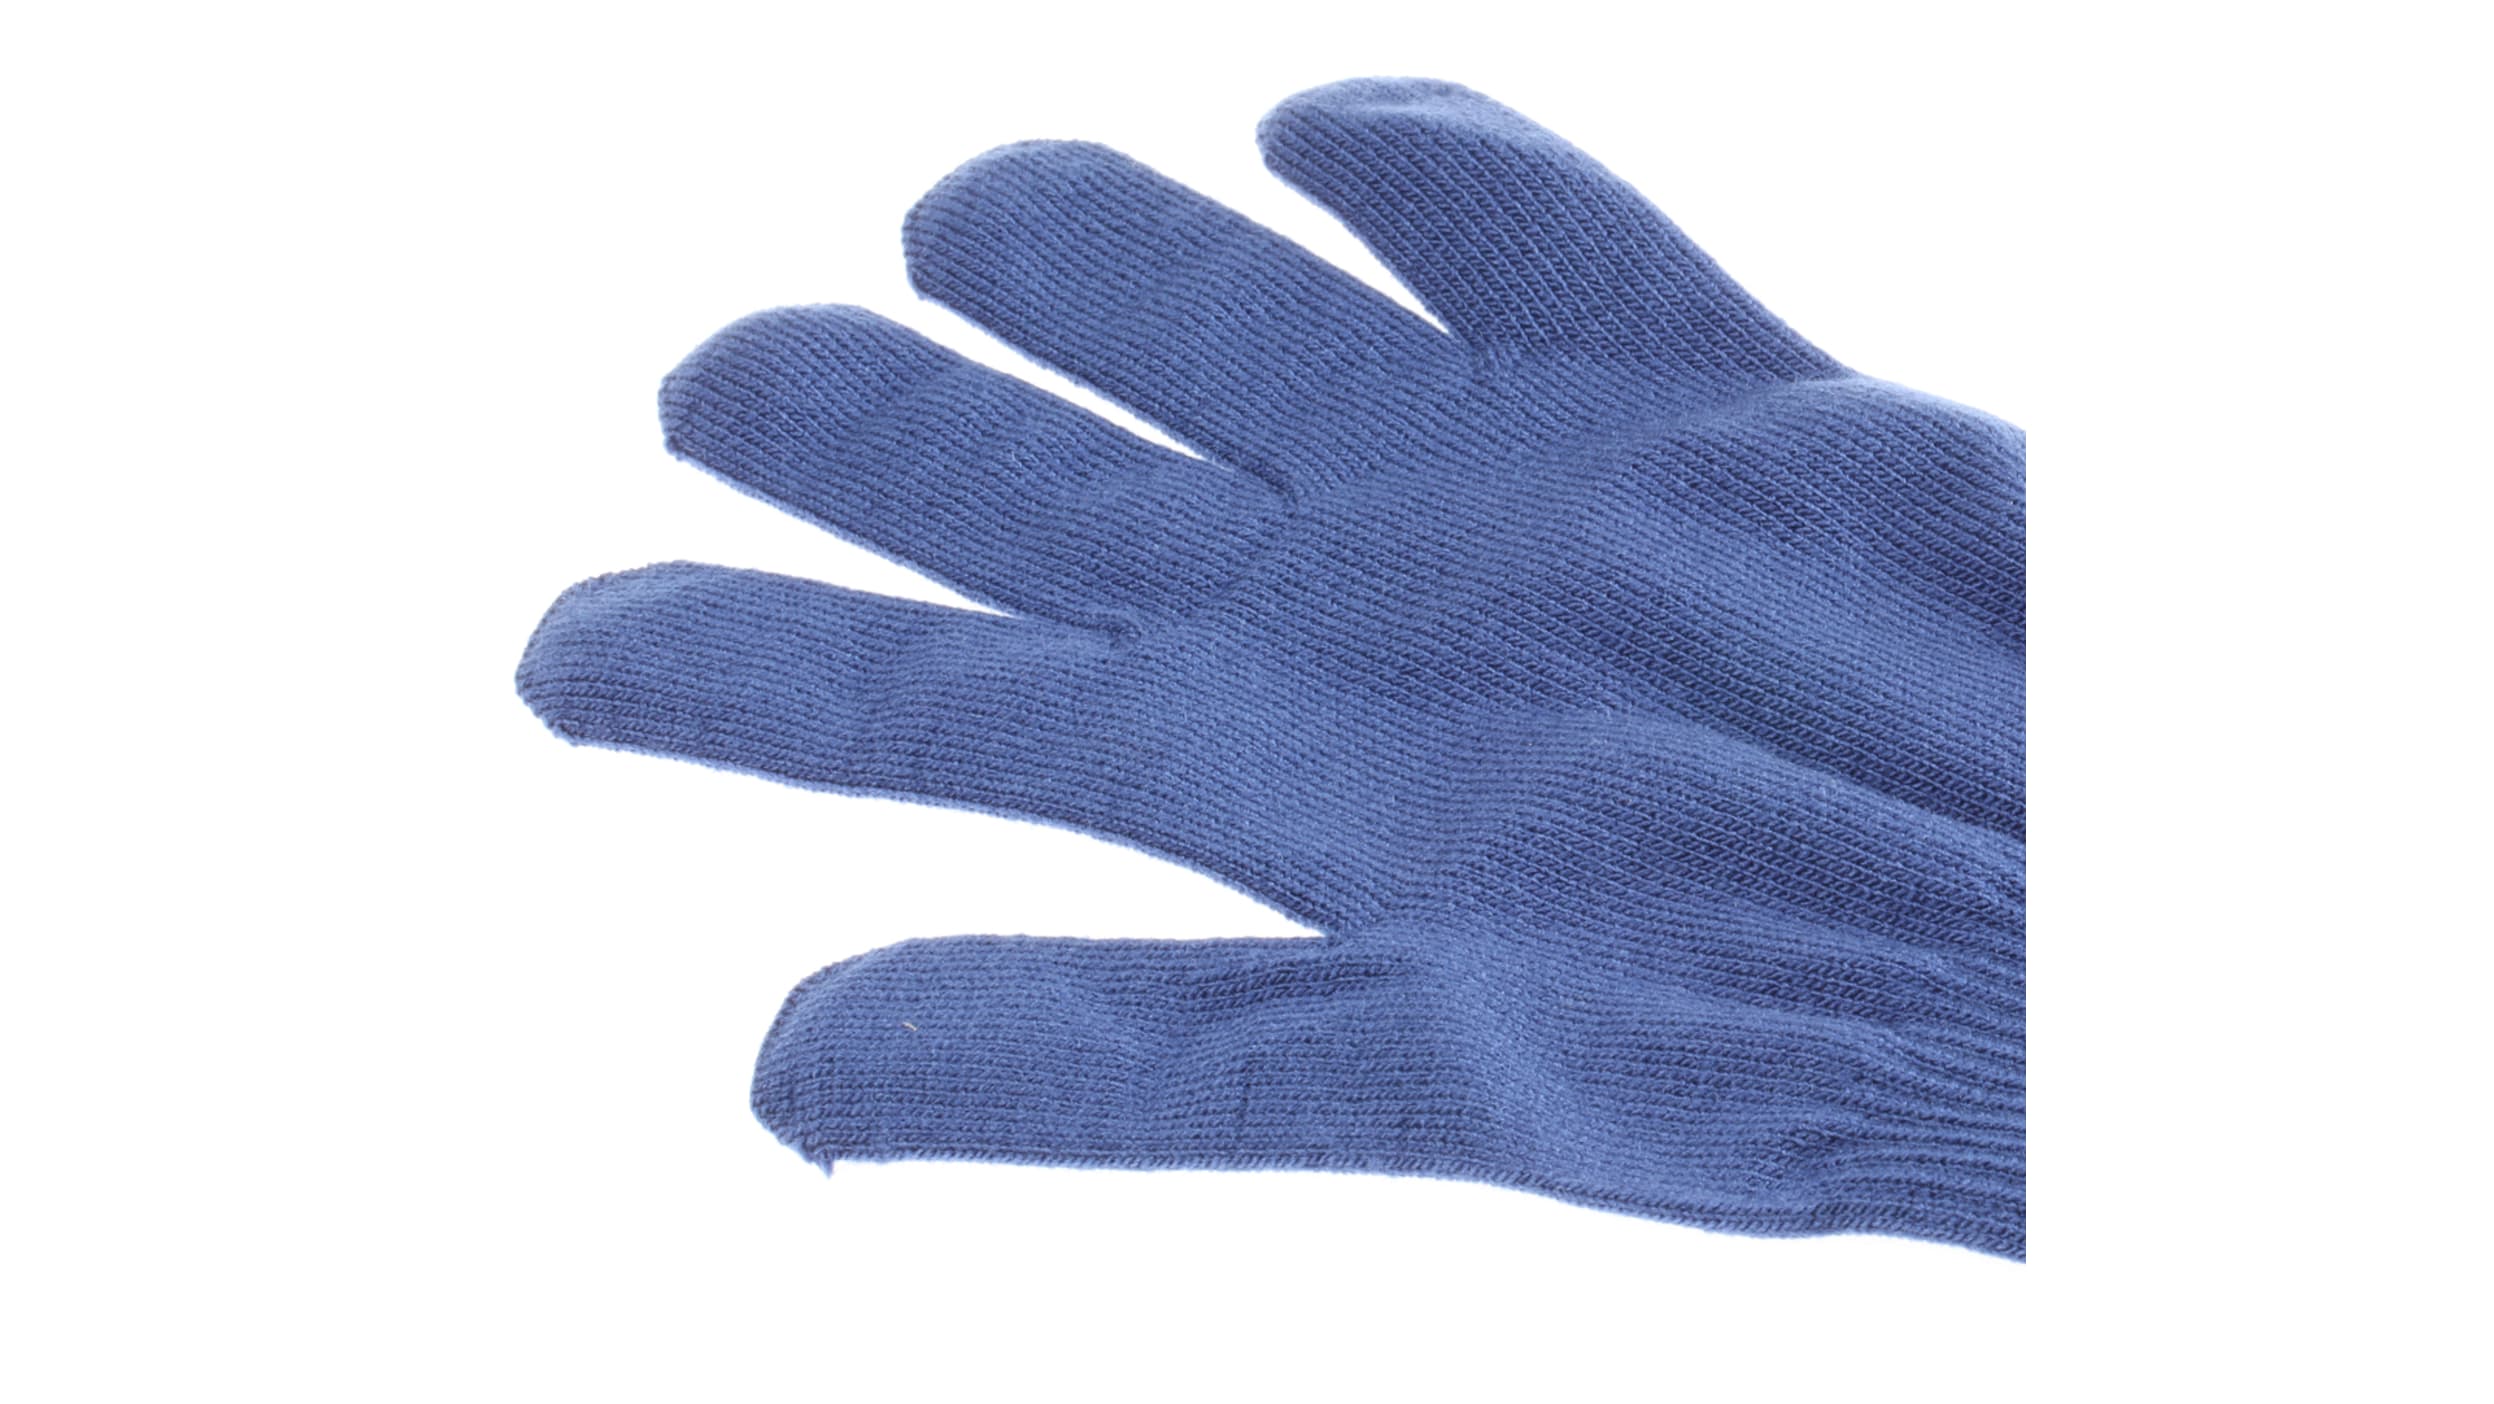 Gants alimentaires anti-froid Ansell Versatouch® 78-102